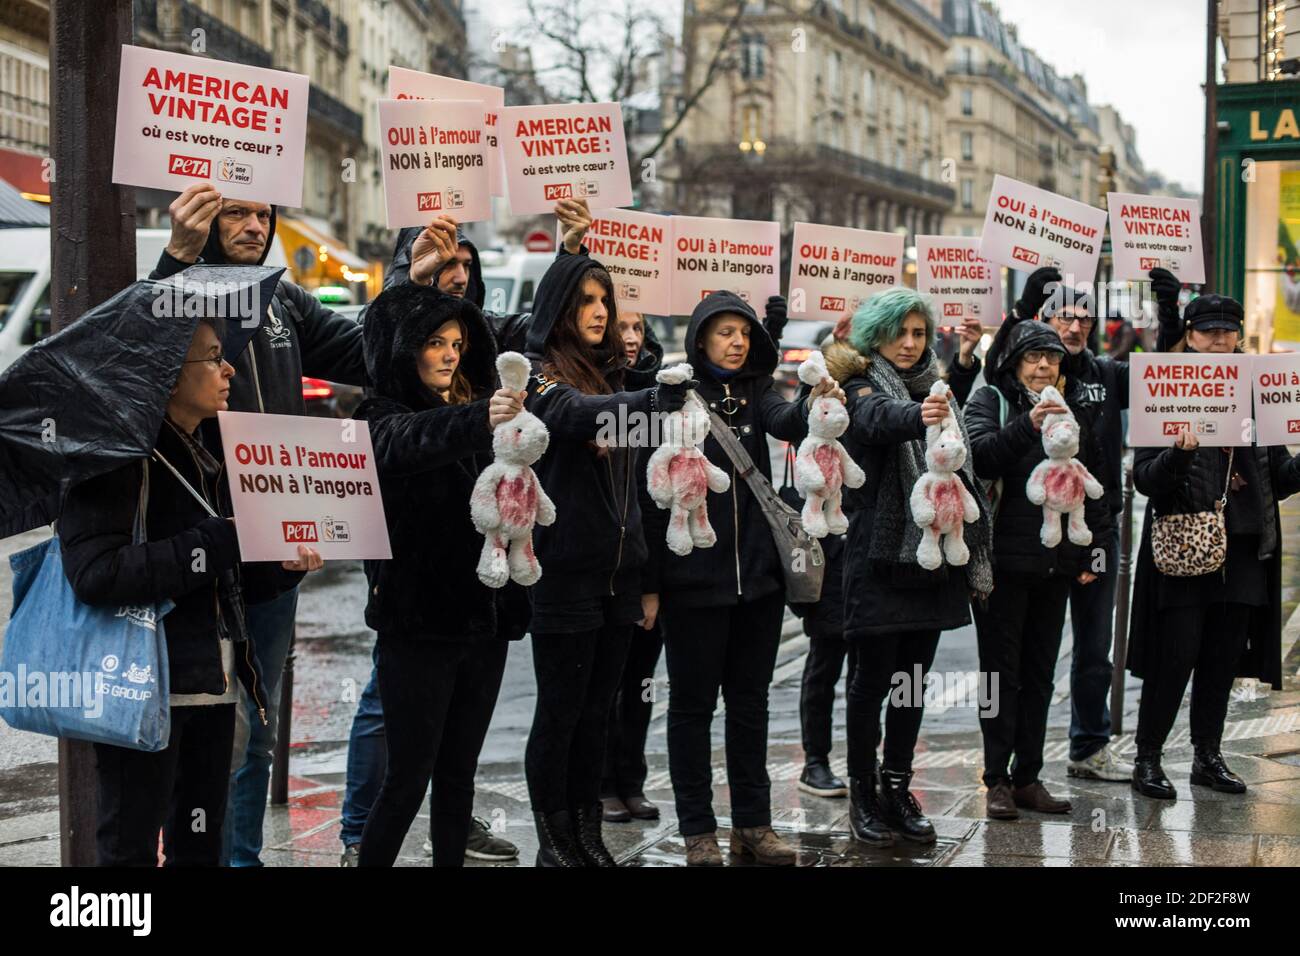 Activists from the PETA and One Voice associations are standing in front of  one of the American Vintage brand's shops, brandishing "bloody rabbits" and  signs to denounce the mistreatment suffered by angoras